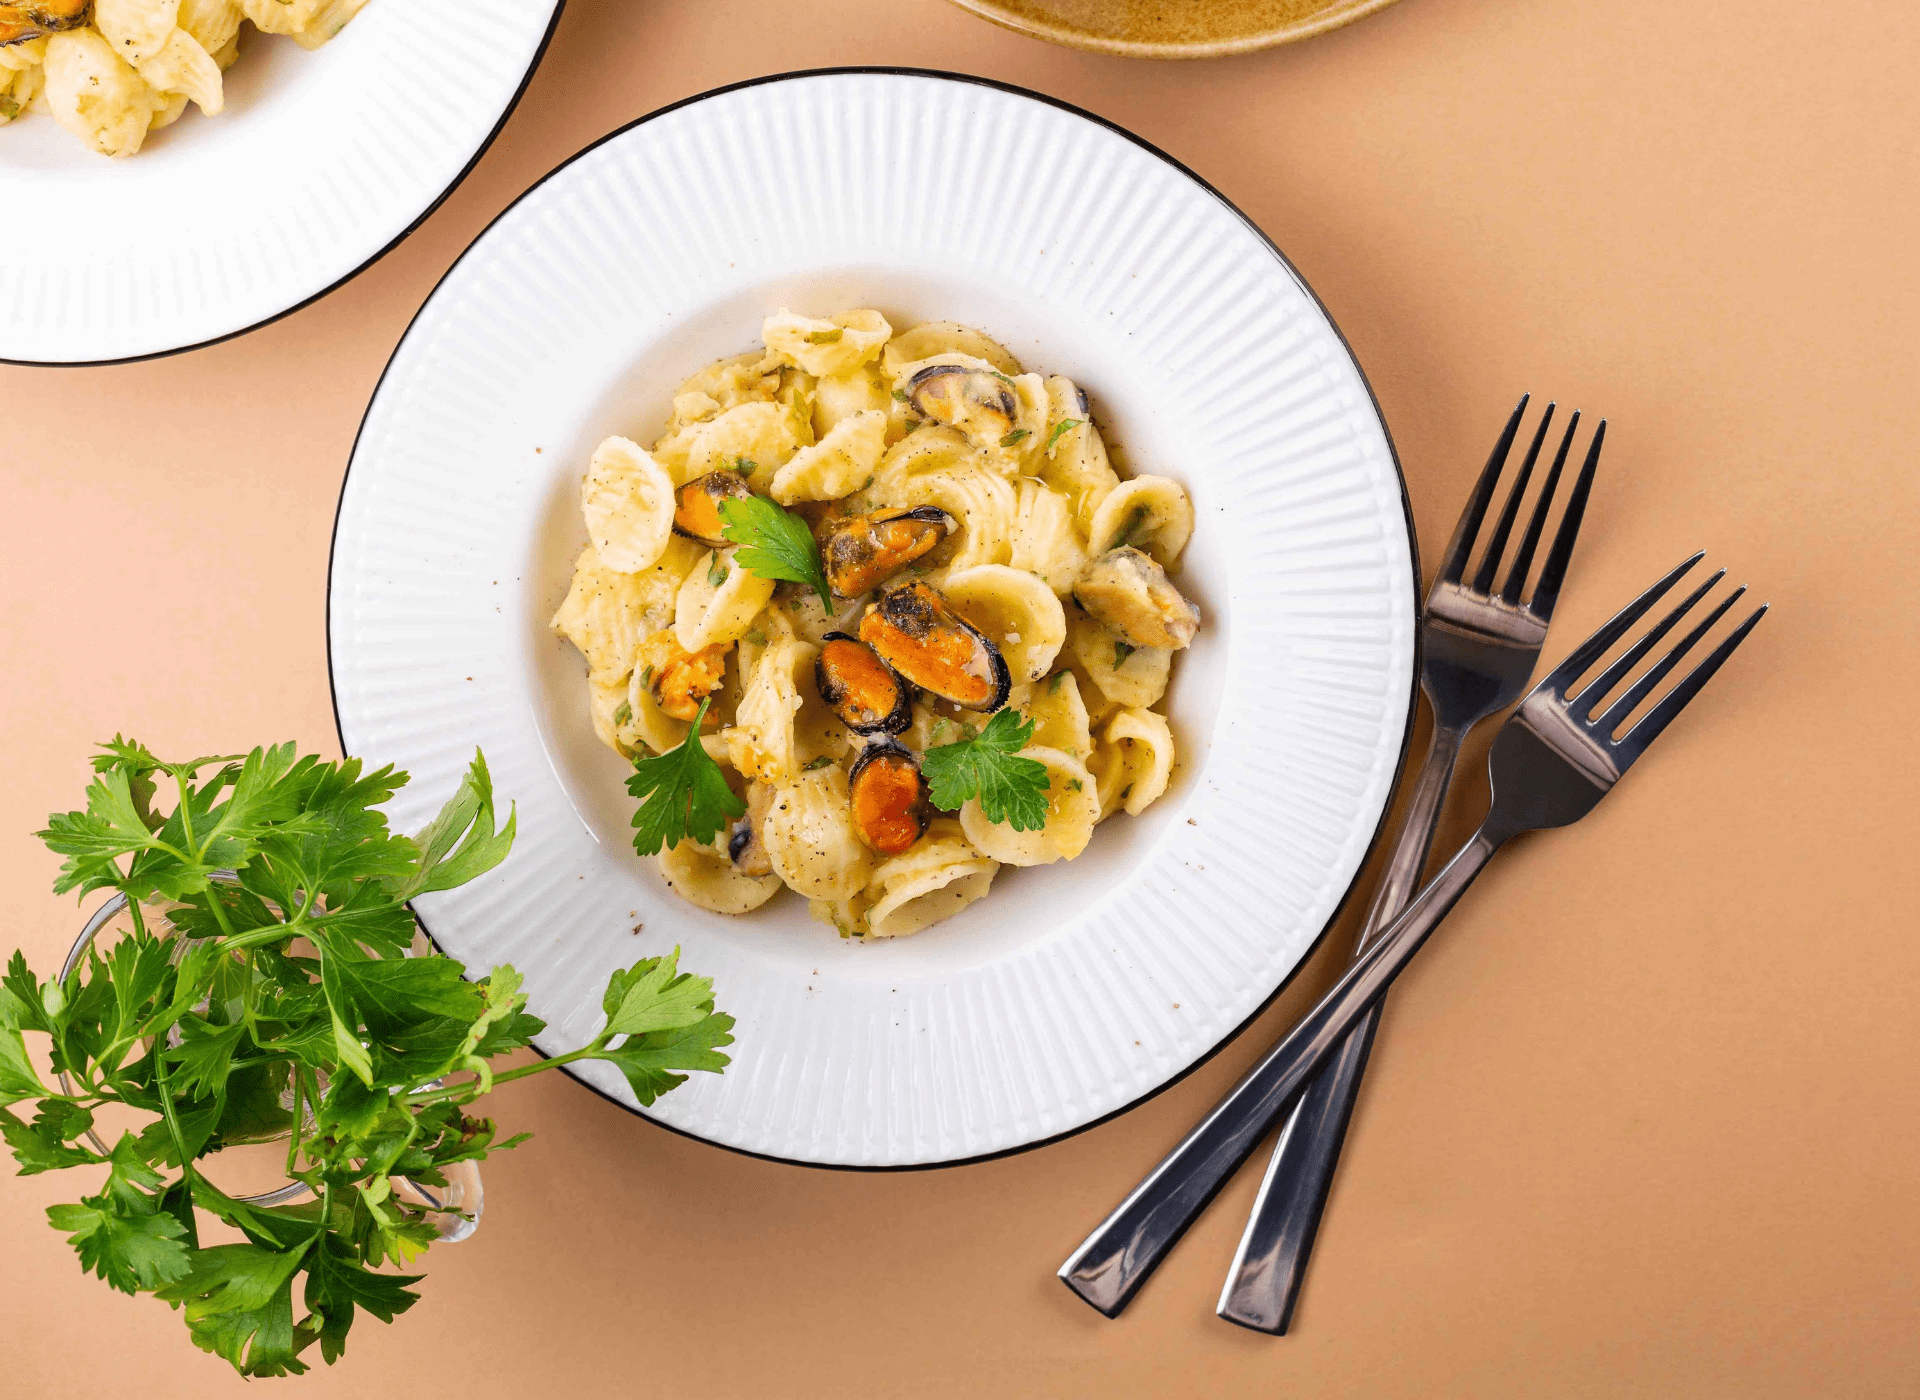 Orecchiette pasta with potatoes and mussels